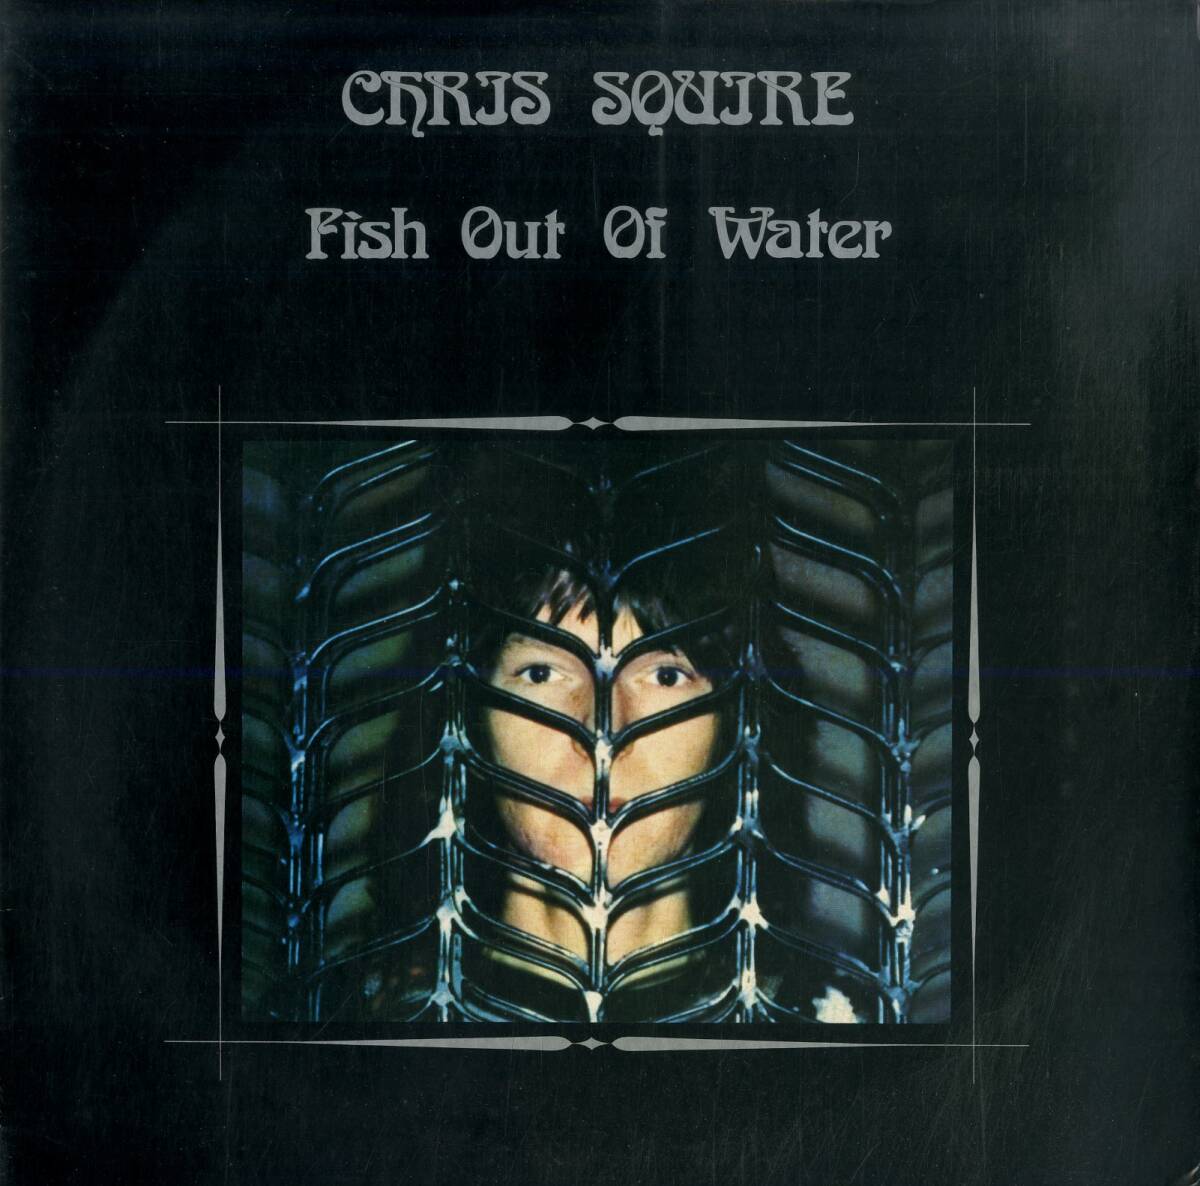 A00594023/LP/クリス・スクワイア (CHRIS SQUIRE・イエス・YES)「Fish Out Of Water 未知への飛翔 (1975年・P-10068A・アートロック)」_画像1